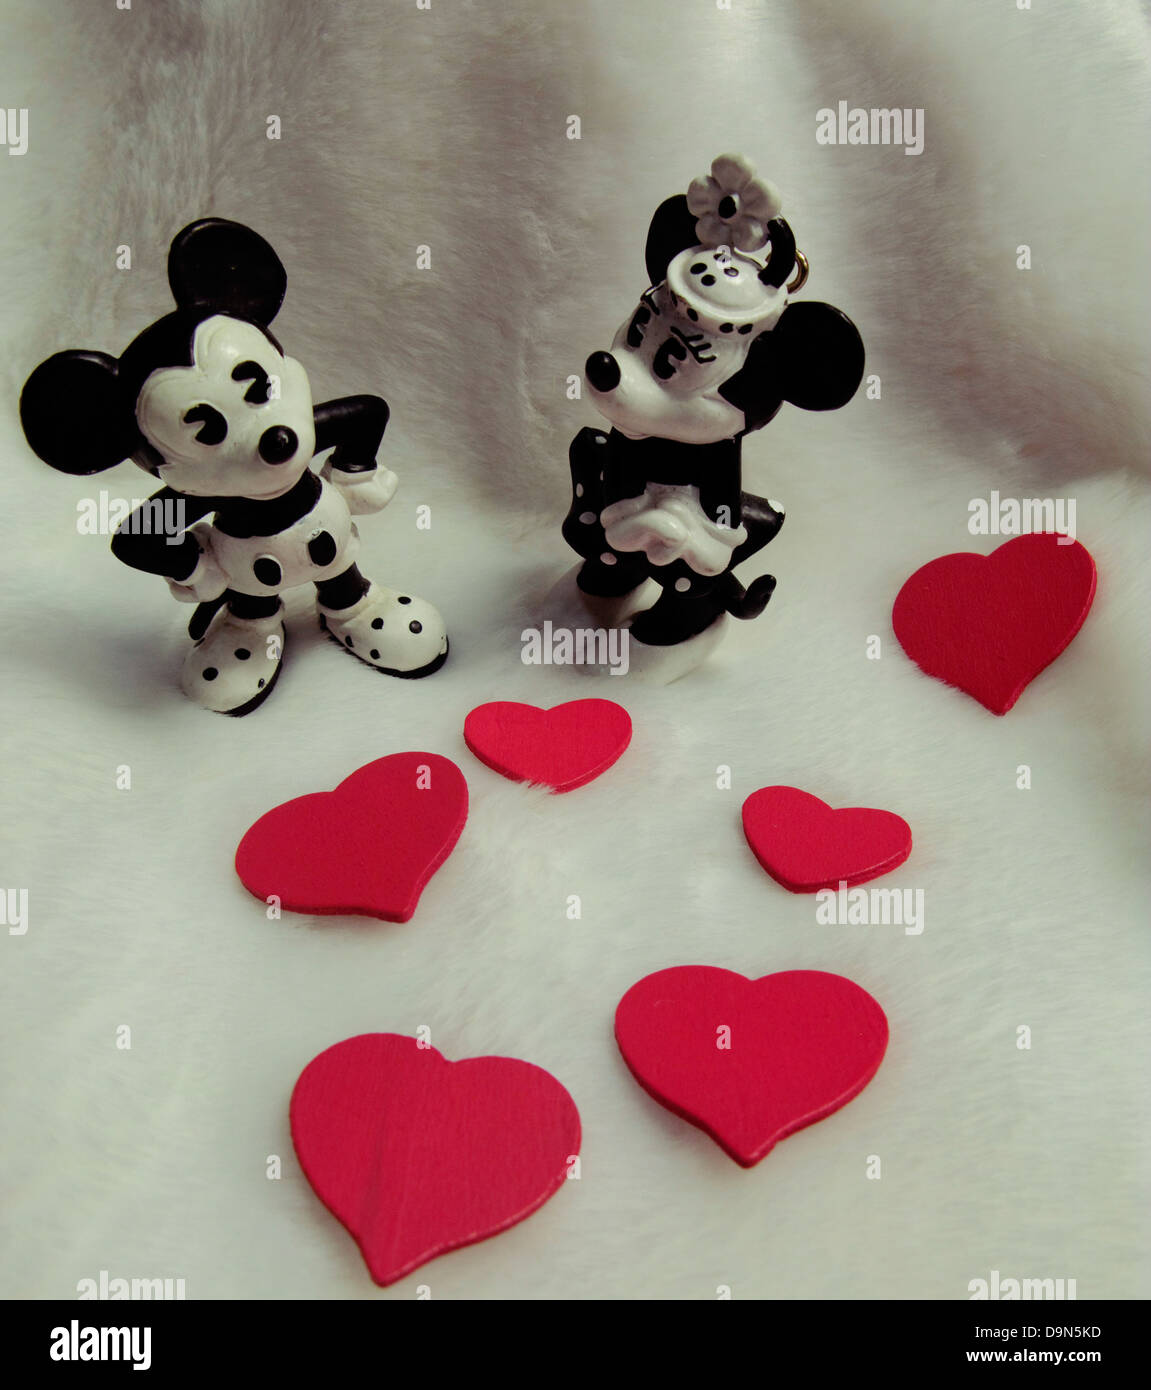 mickey mouse and minnie in love Stock Photo